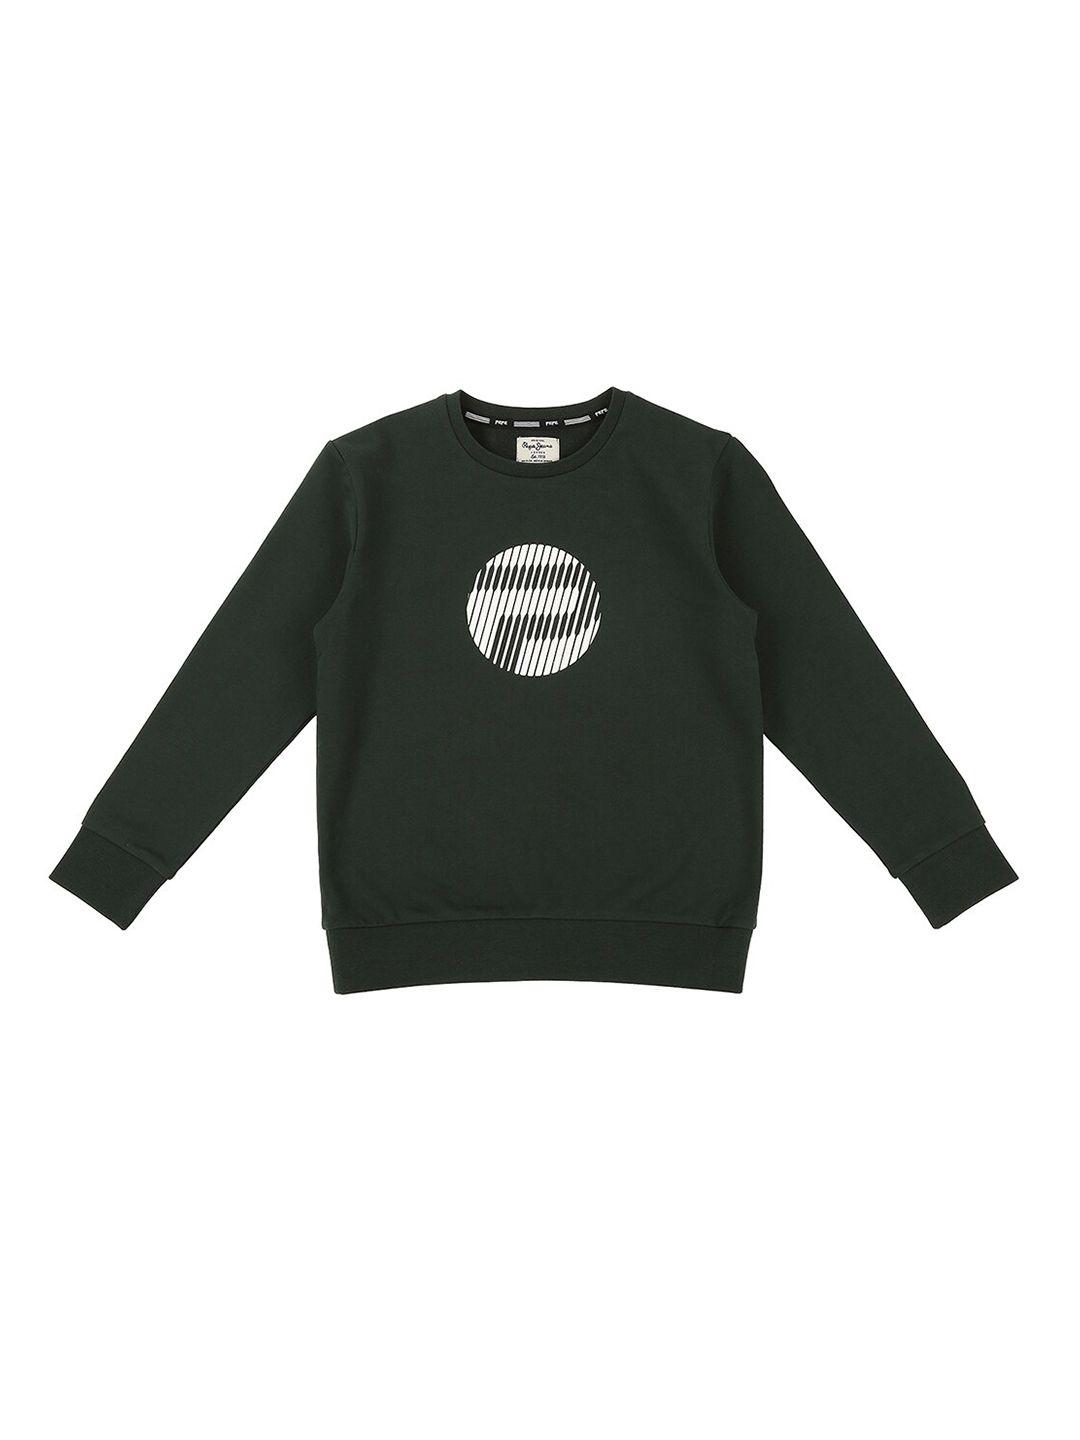 Pepe Jeans Boys Green Placement Printed Sweatshirt